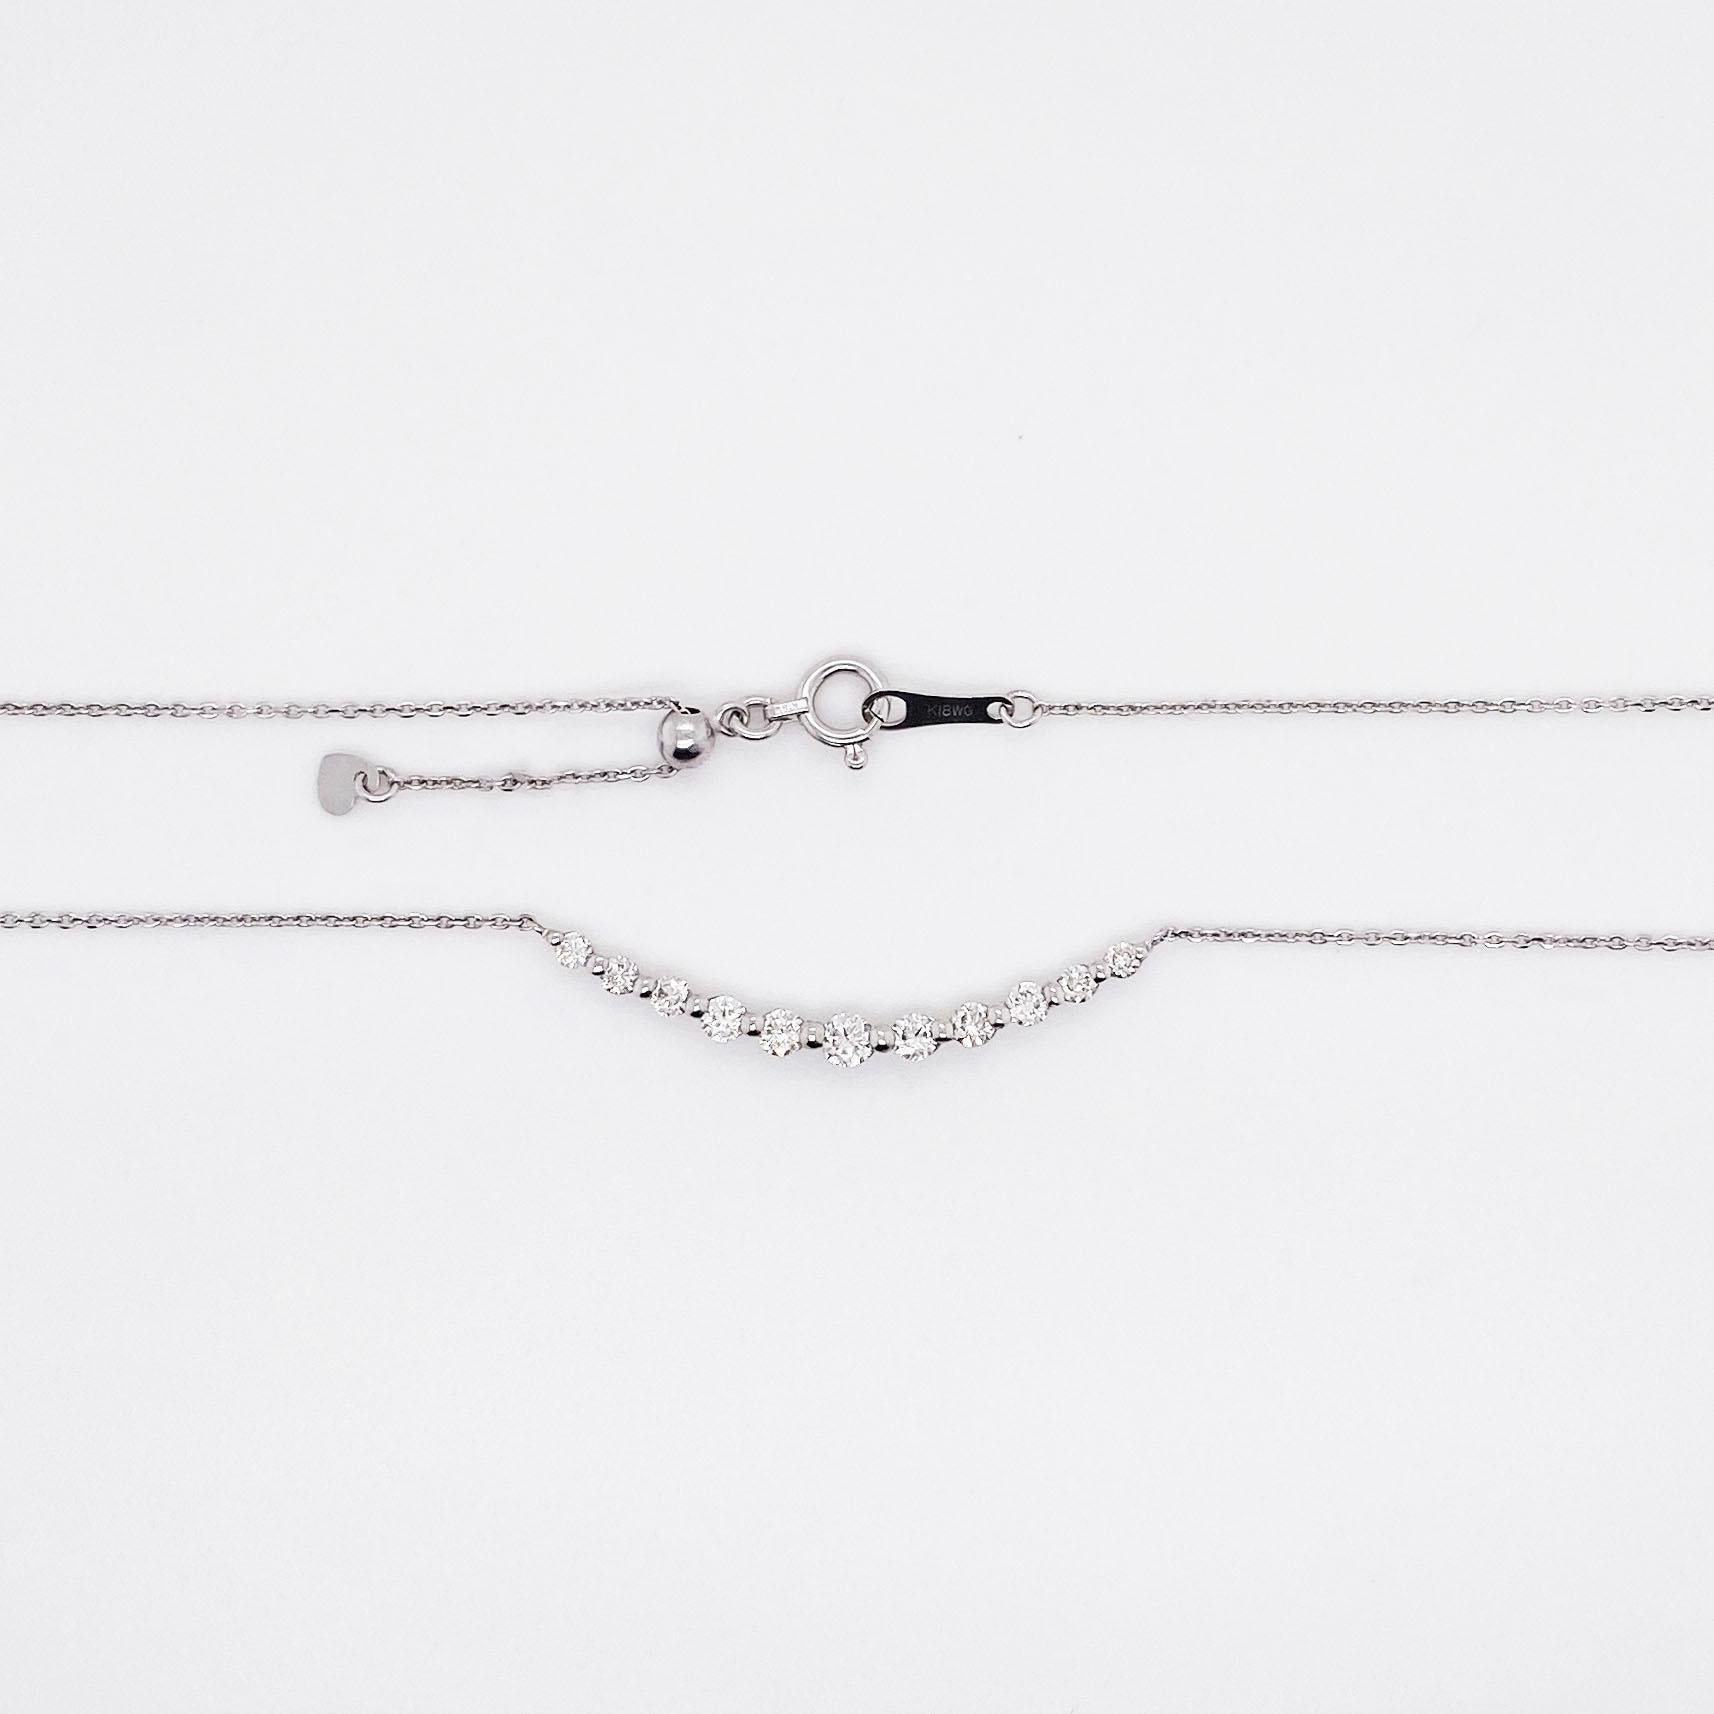 .50 carat total diamond weight (1/2 carat total) handcrafted in 18 karat white gold necklace:
This necklace is adorable and is the perfect necklace to show off eleven diamonds!  It is a simple design but will definitely make you smile.  The east to